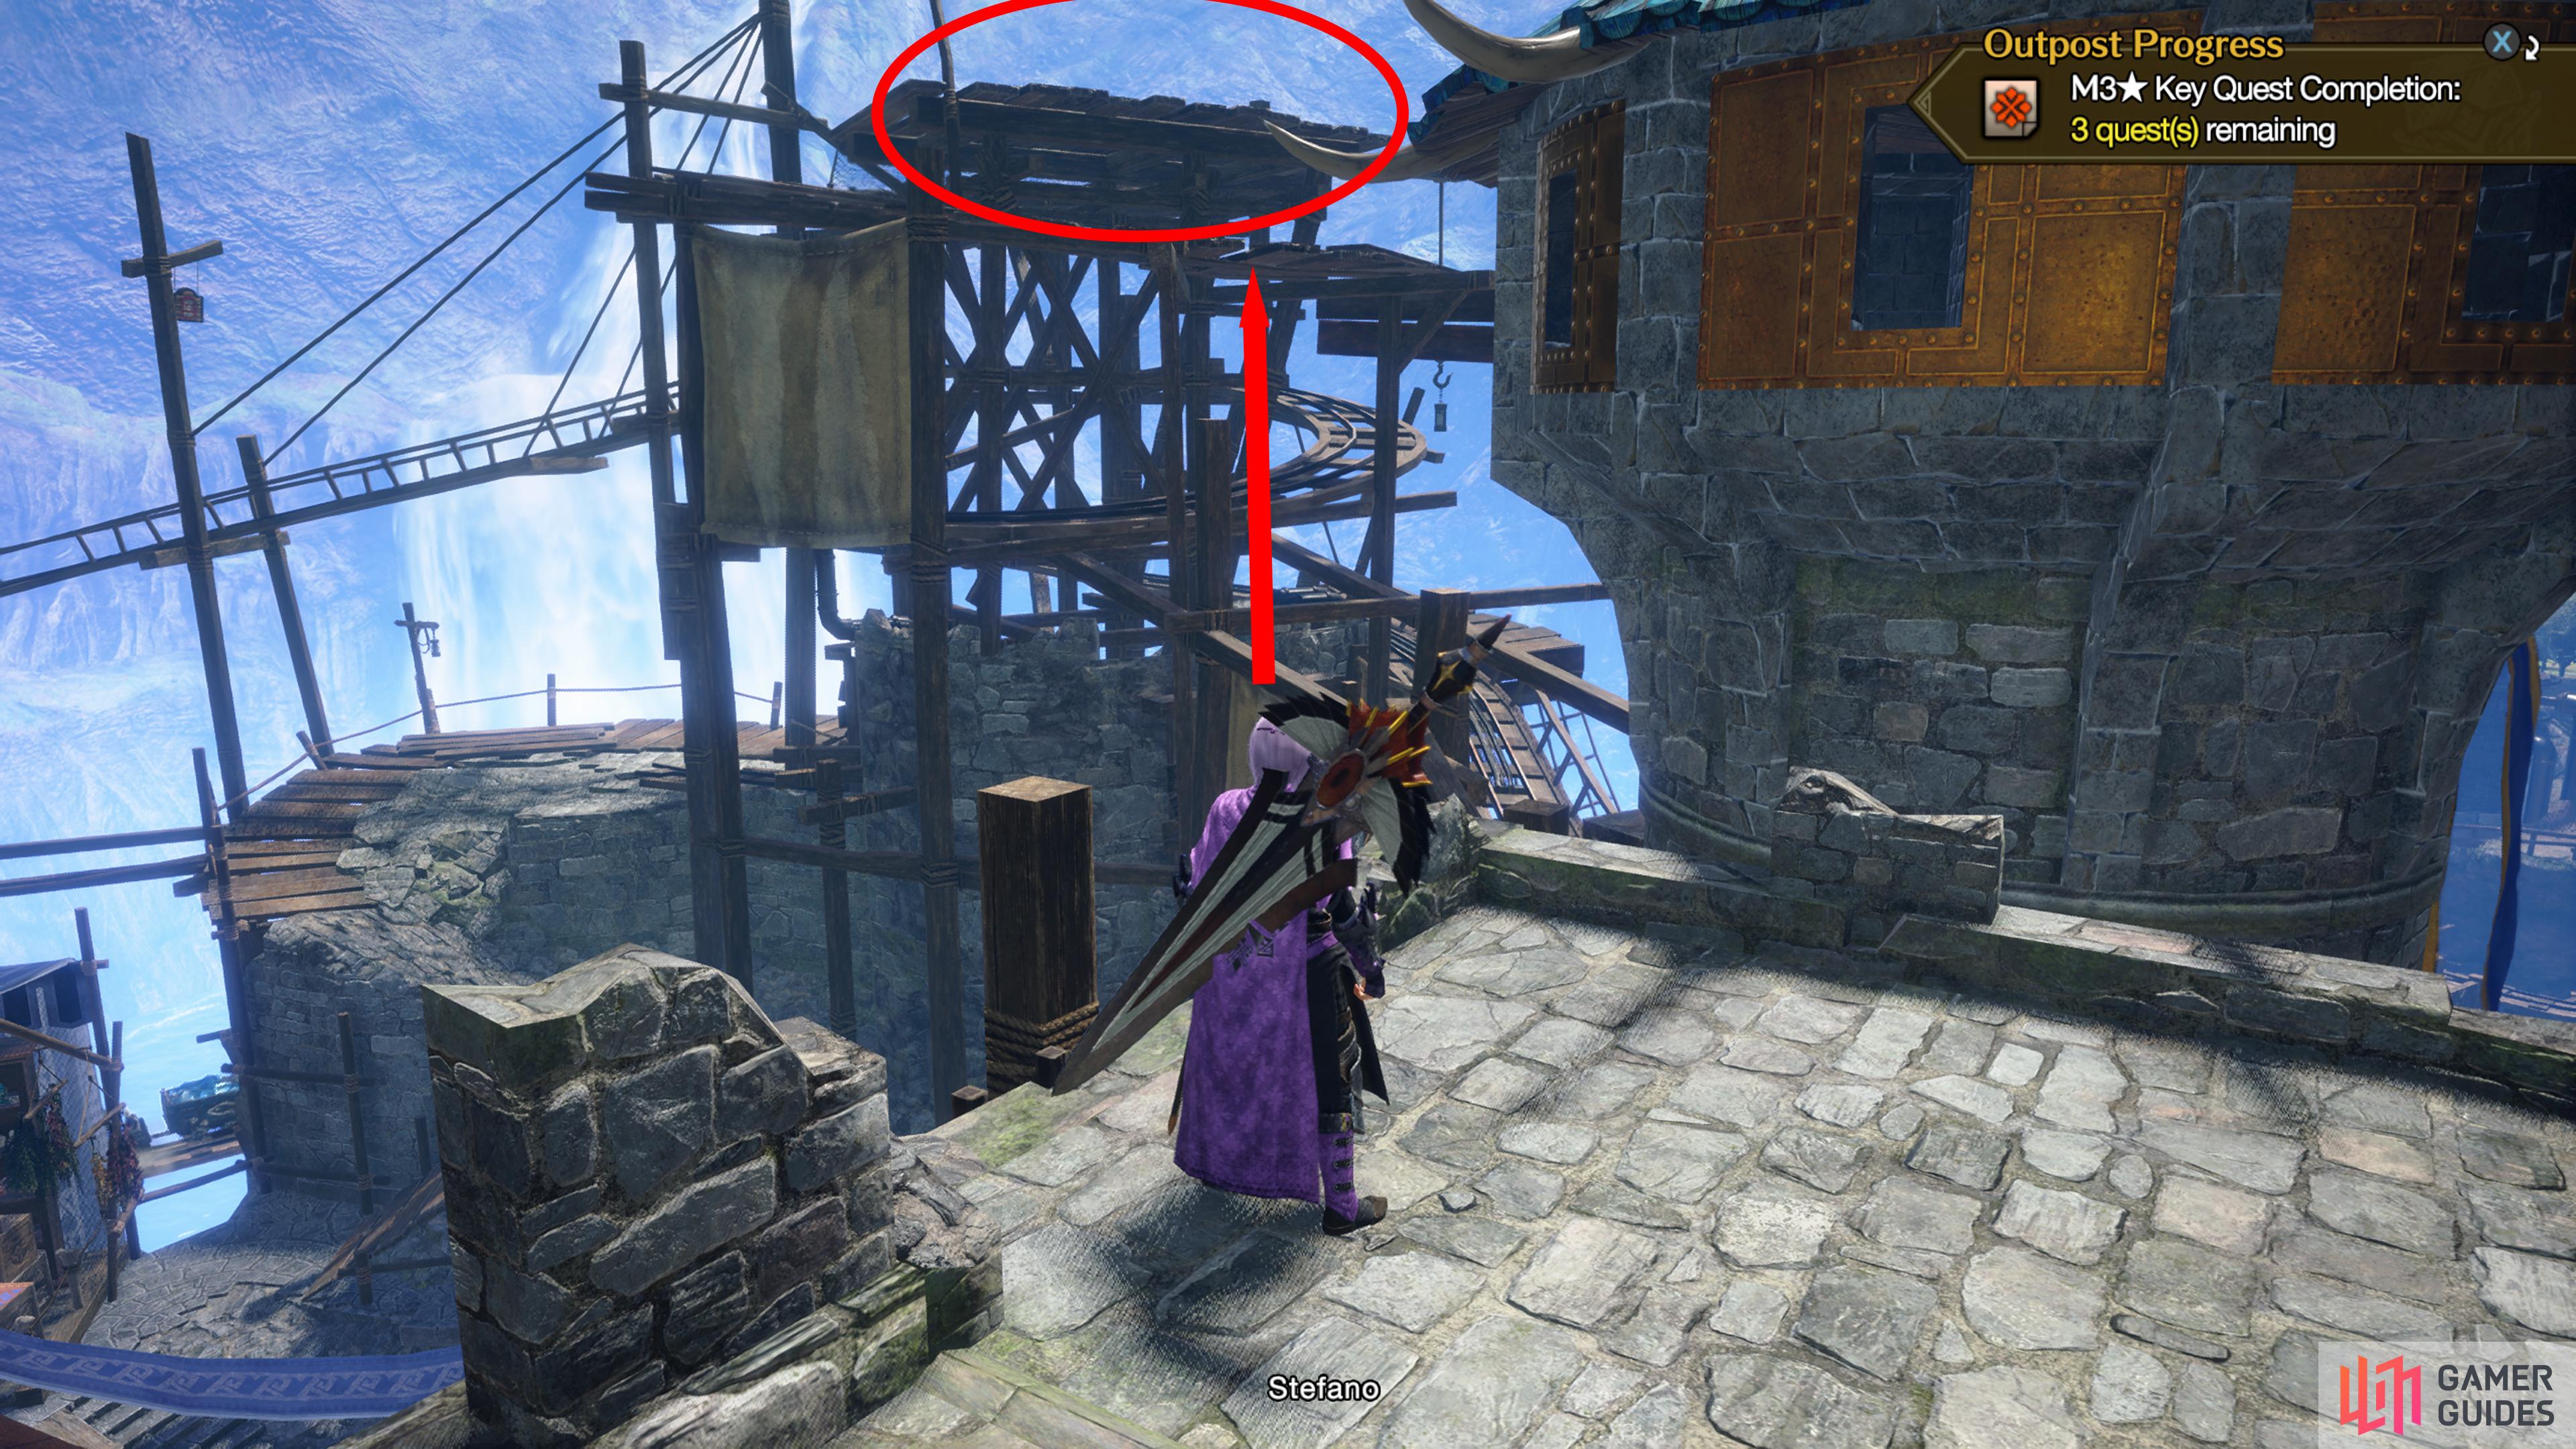 From the ramparts, turn around, and do two wirebug jumps to reach the wooden platform above the train tracks.